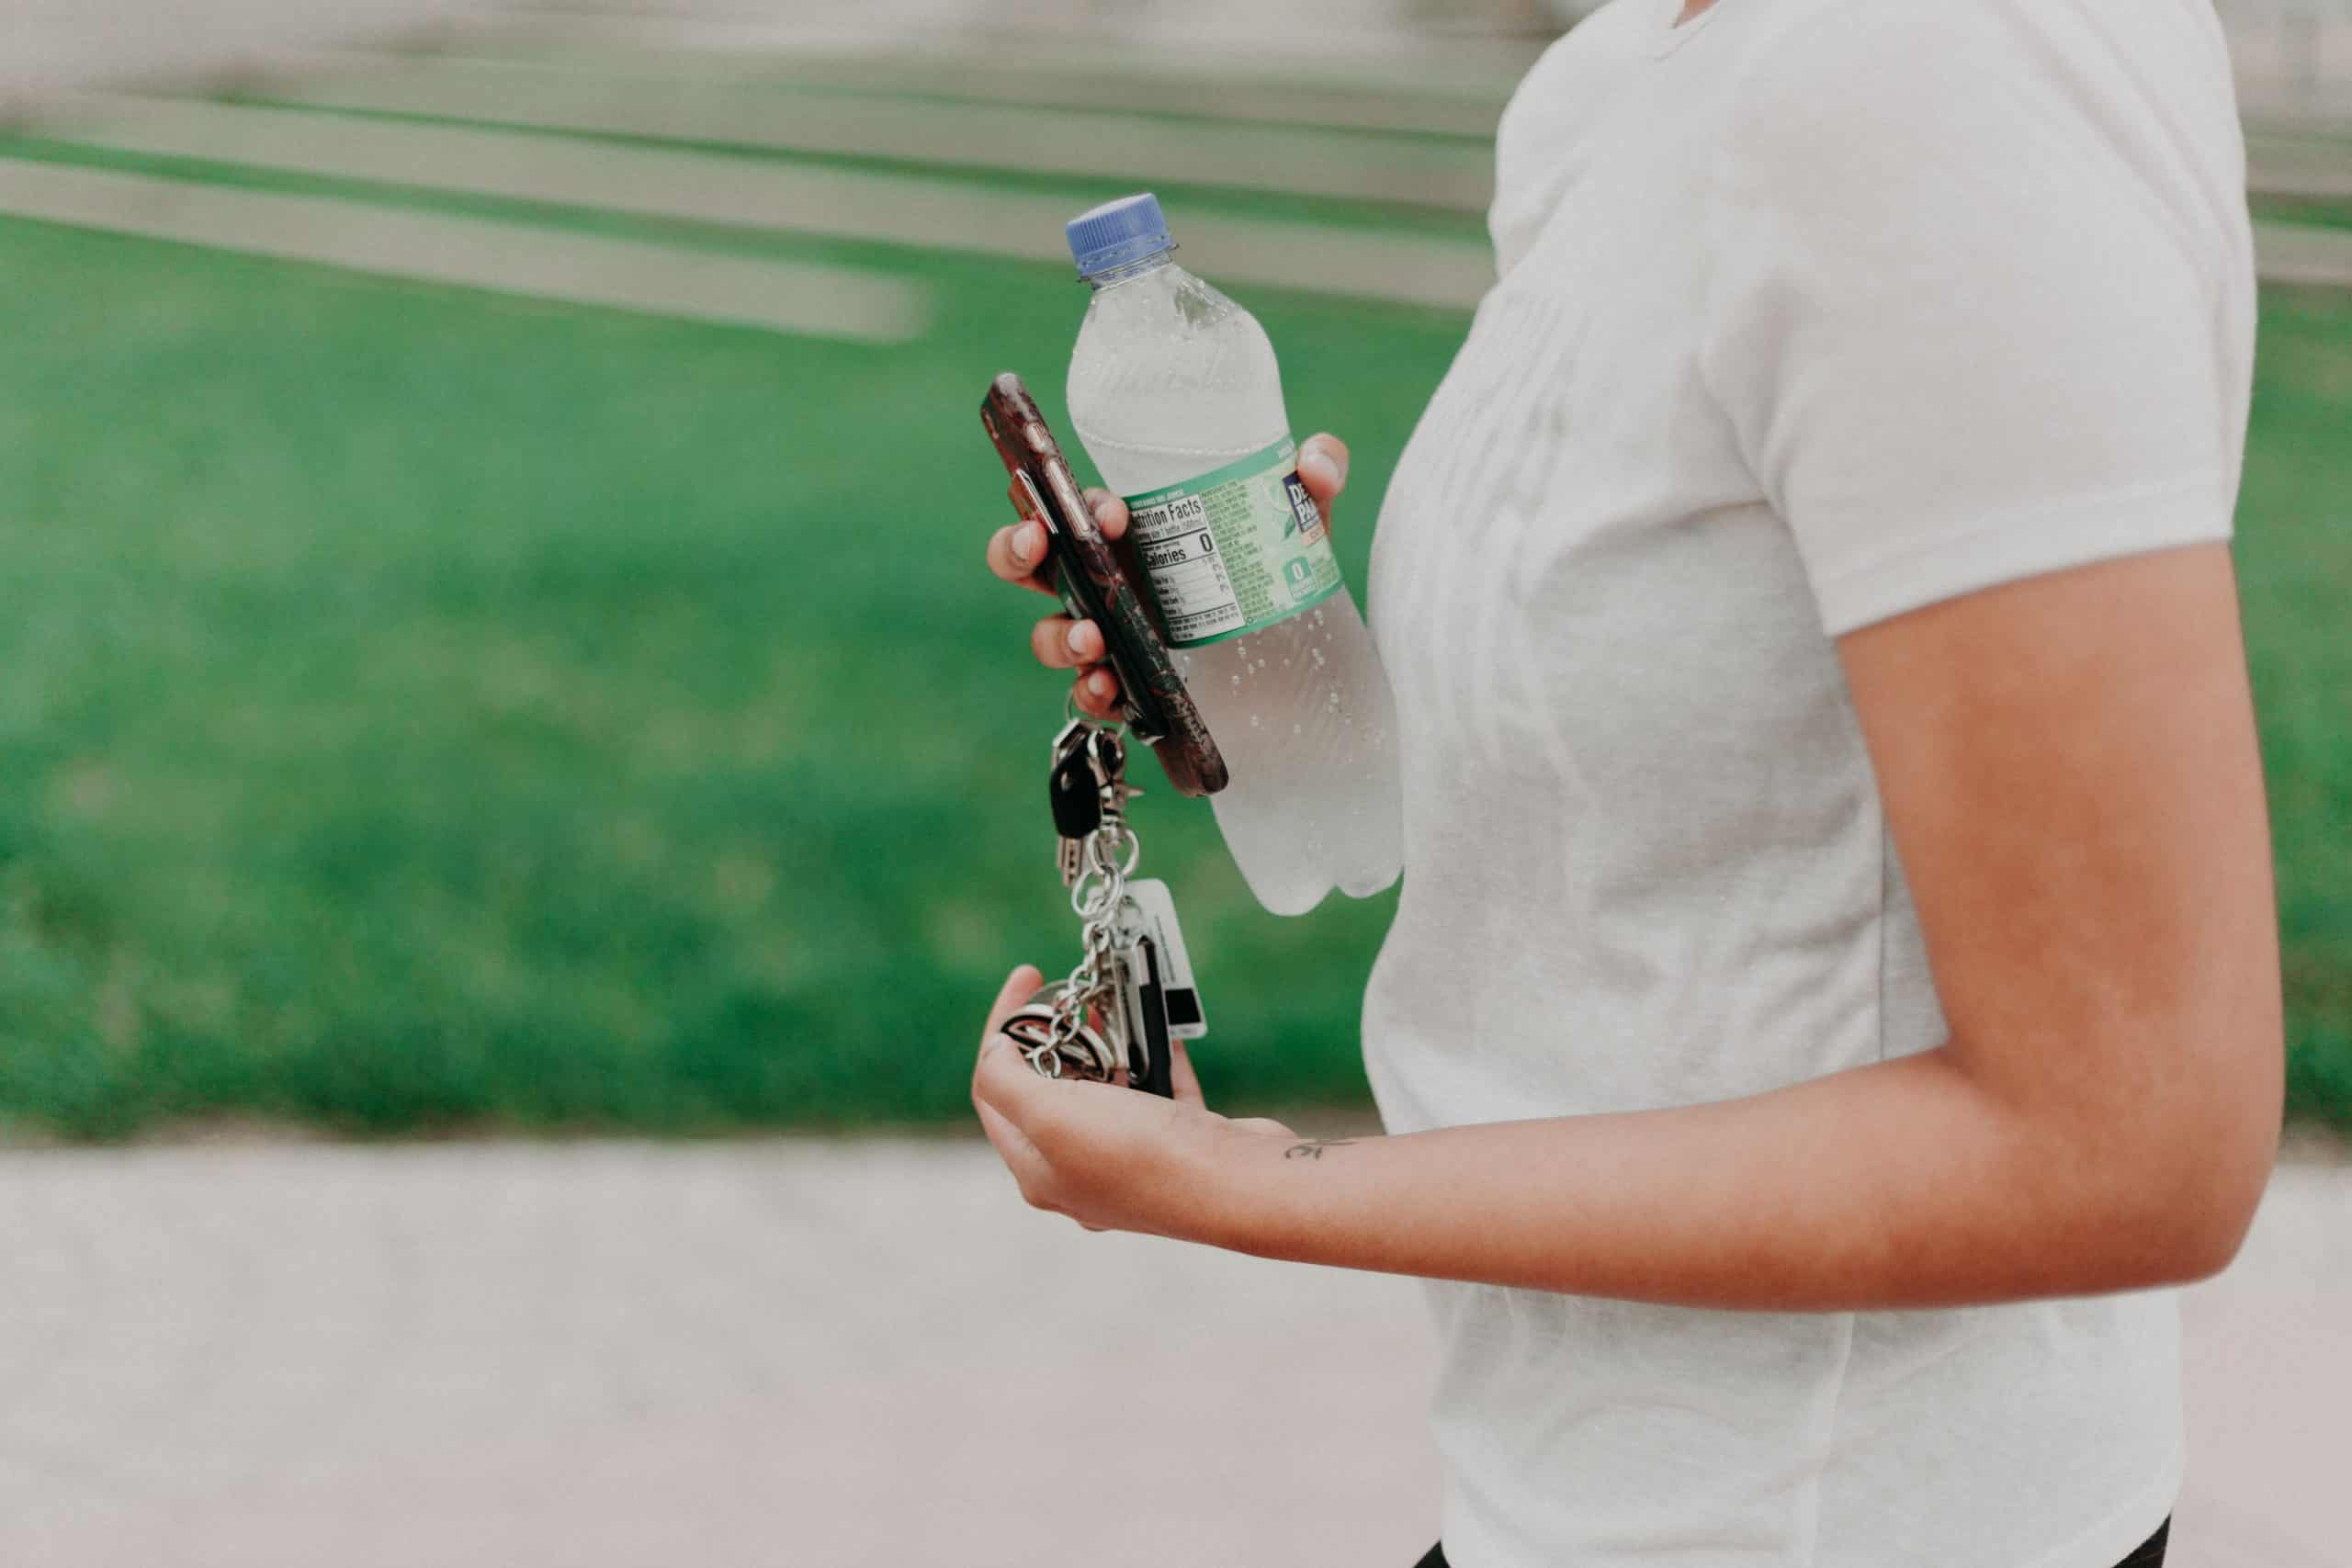 The Essential Companion for Hydration: Why You Need a Clean Water Bottle